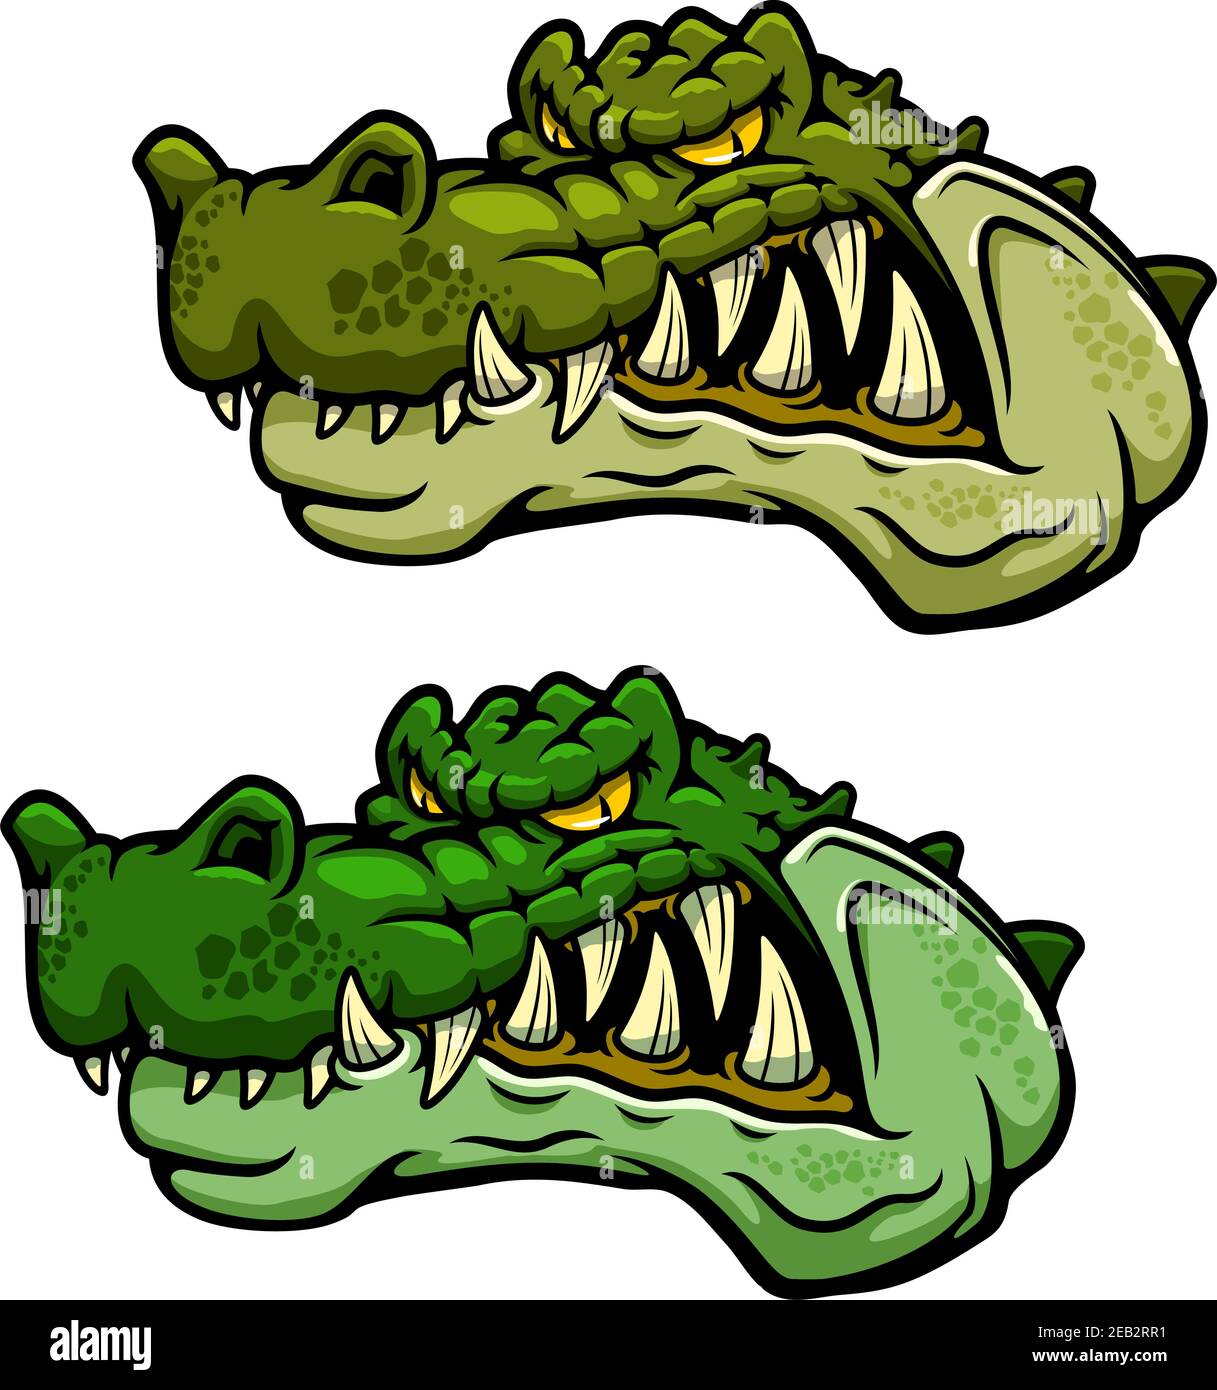 Angry crocodile character head with bared teeth and rugged armored green skin, for sporting mascot or tattoo design Stock Vector